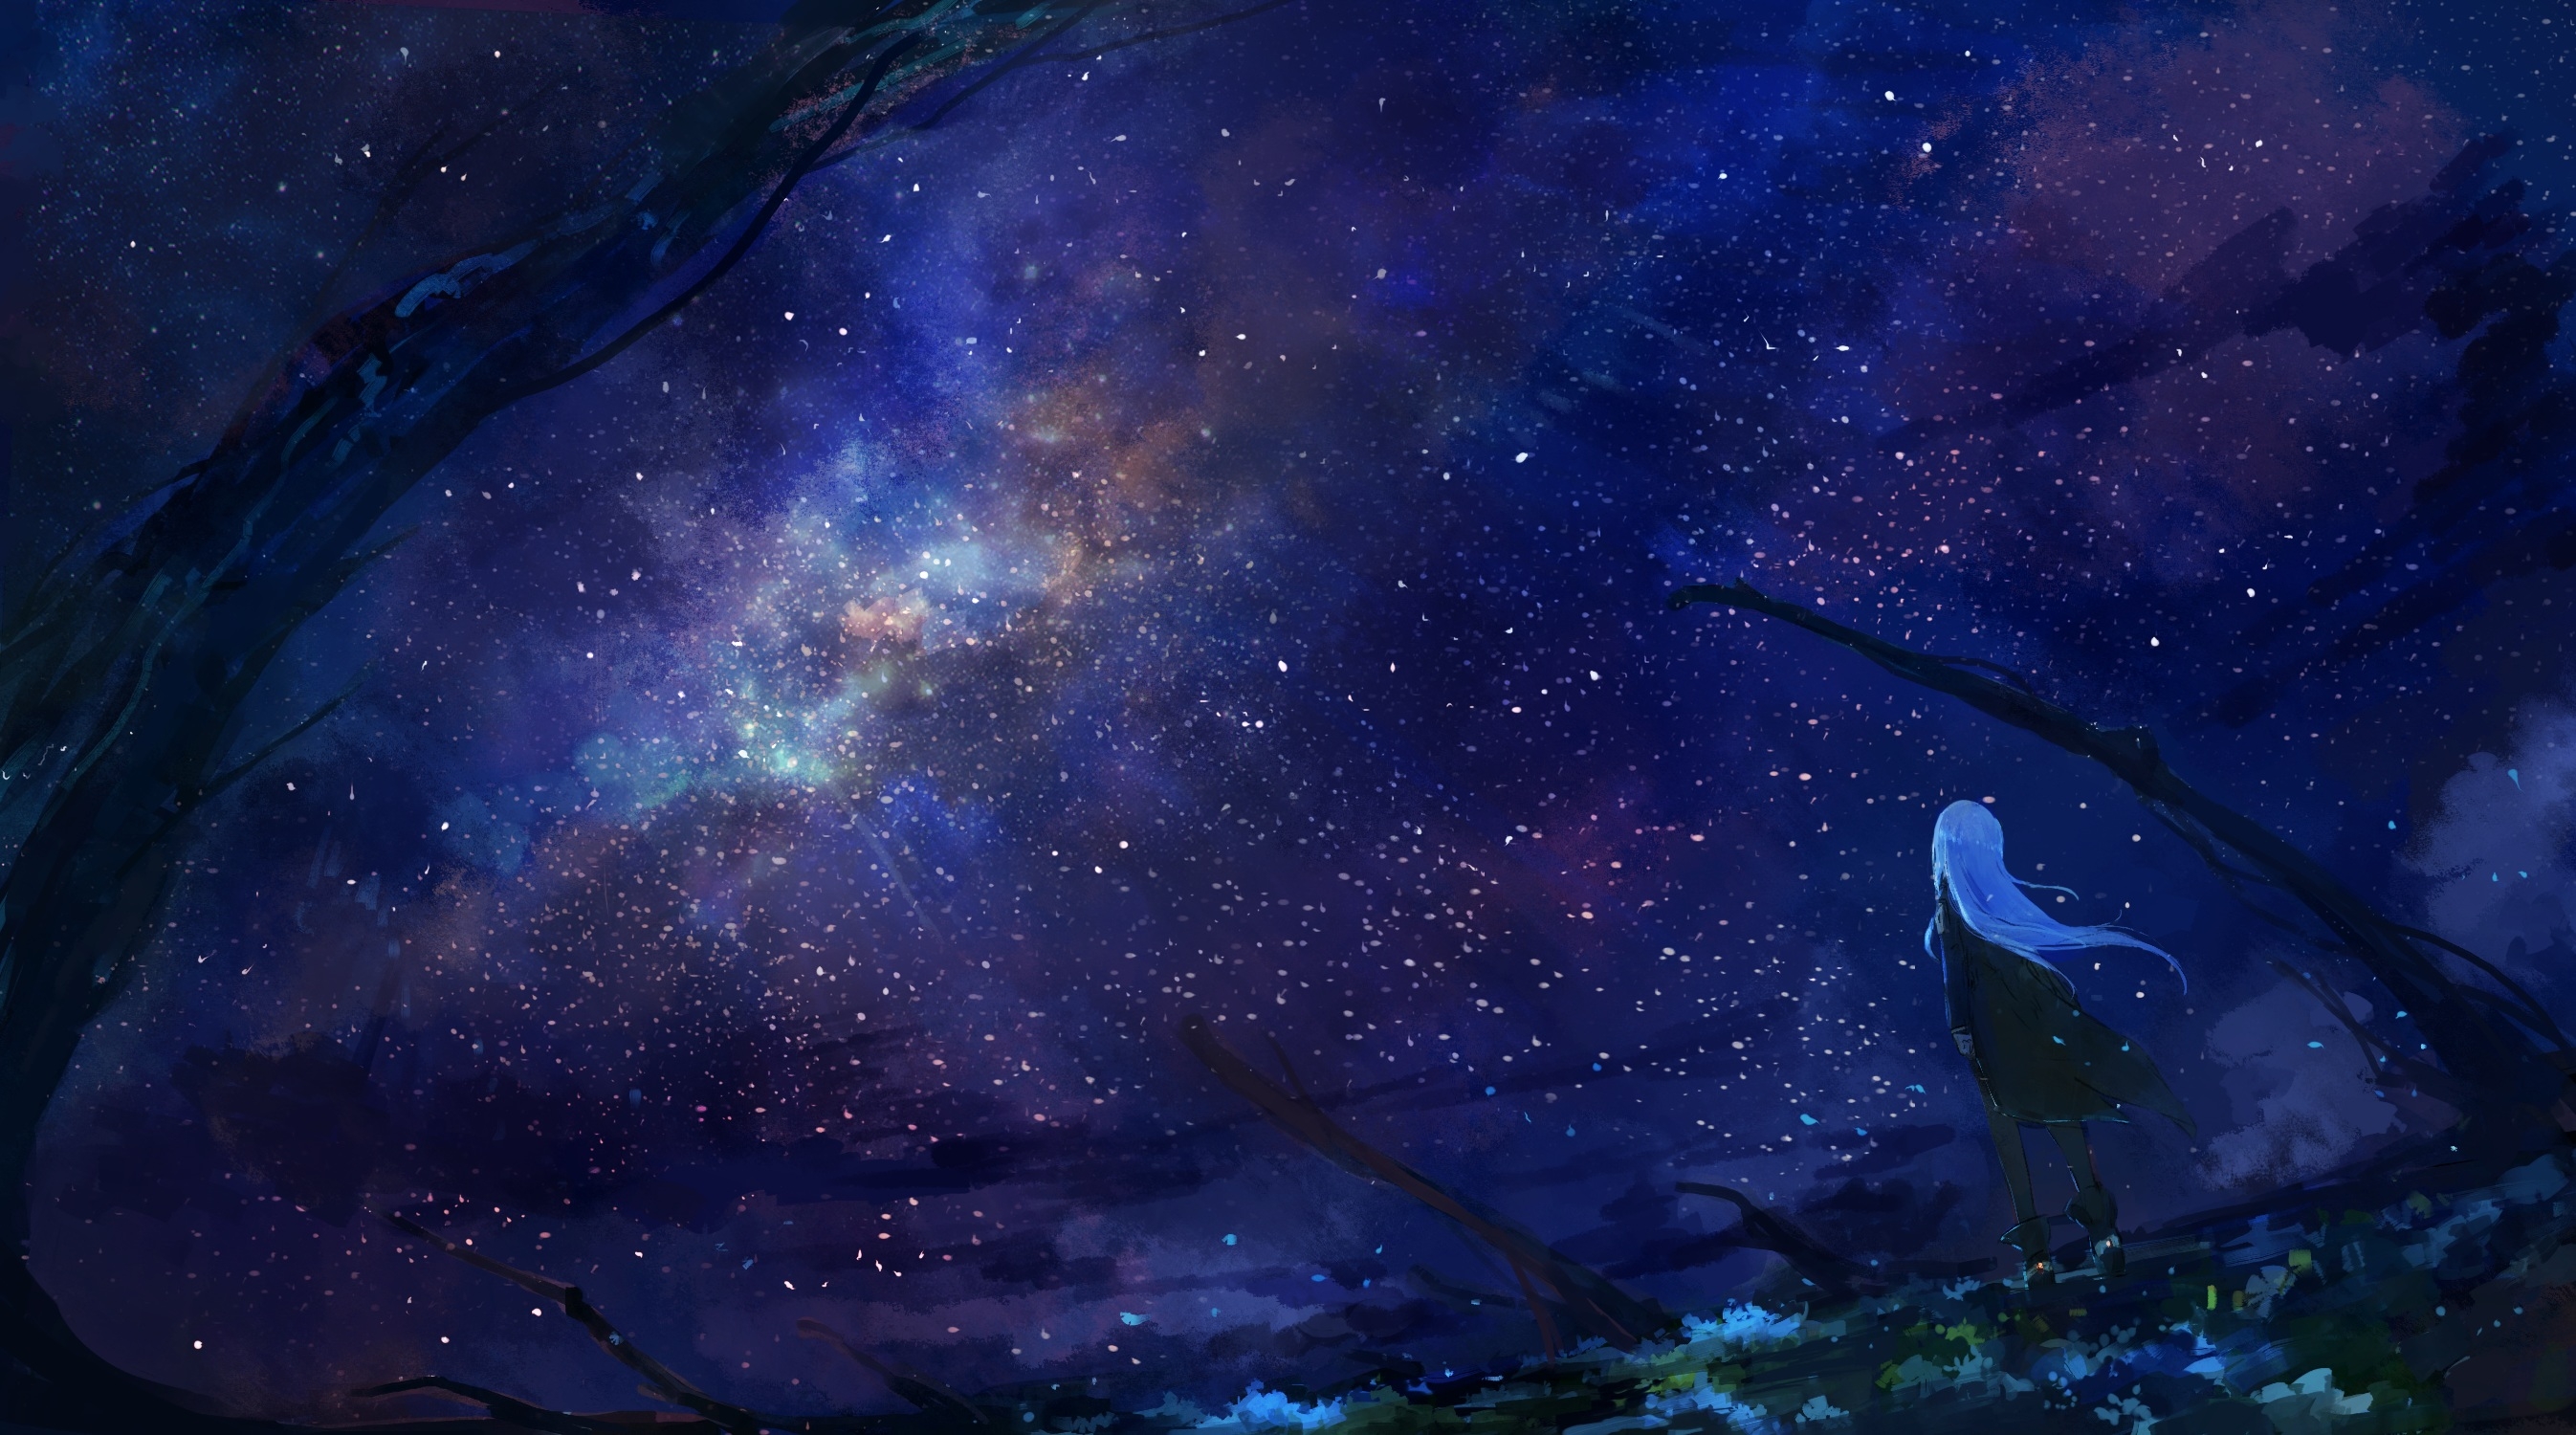 Anime Starry Night Wallpapers - Wallpaper Cave